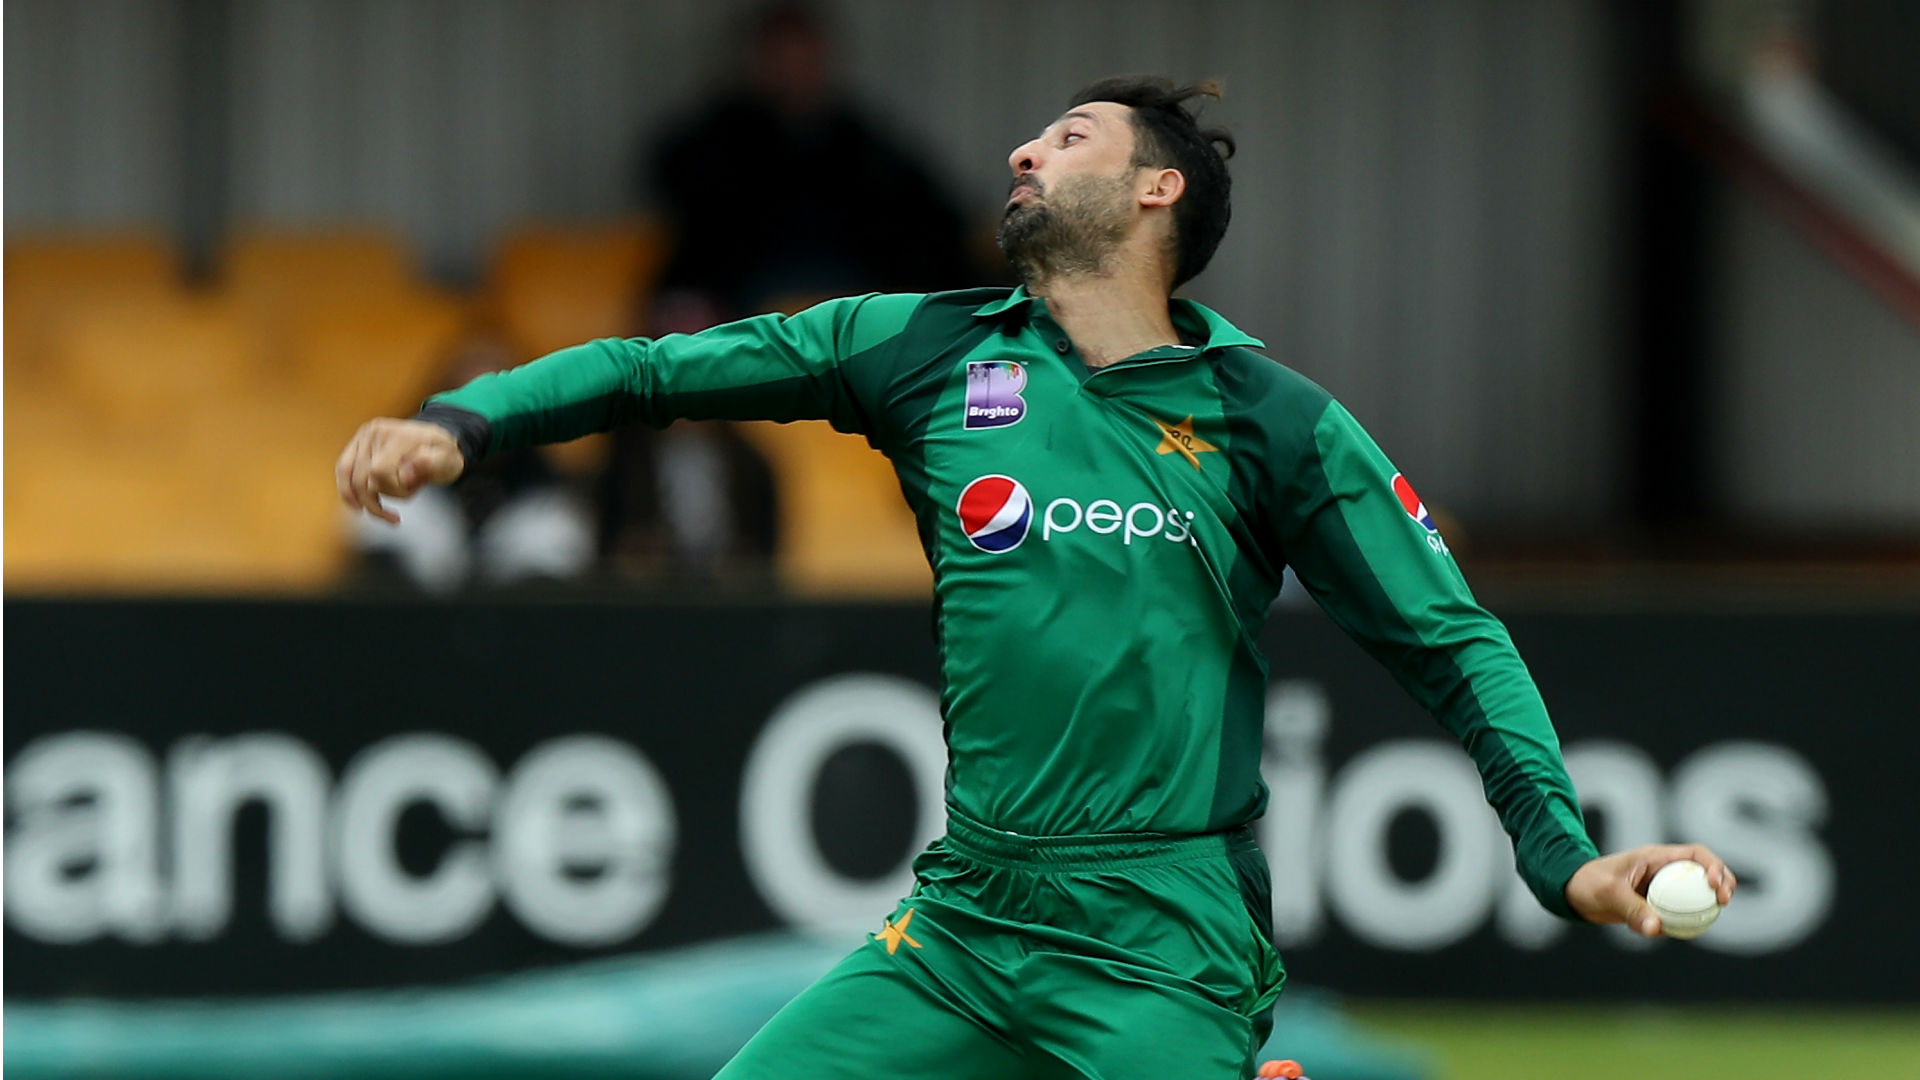 Having missed out on Pakistan's Cricket World Cup squad, Junaid Khan posted a cryptic tweet on his official account before deleting it.